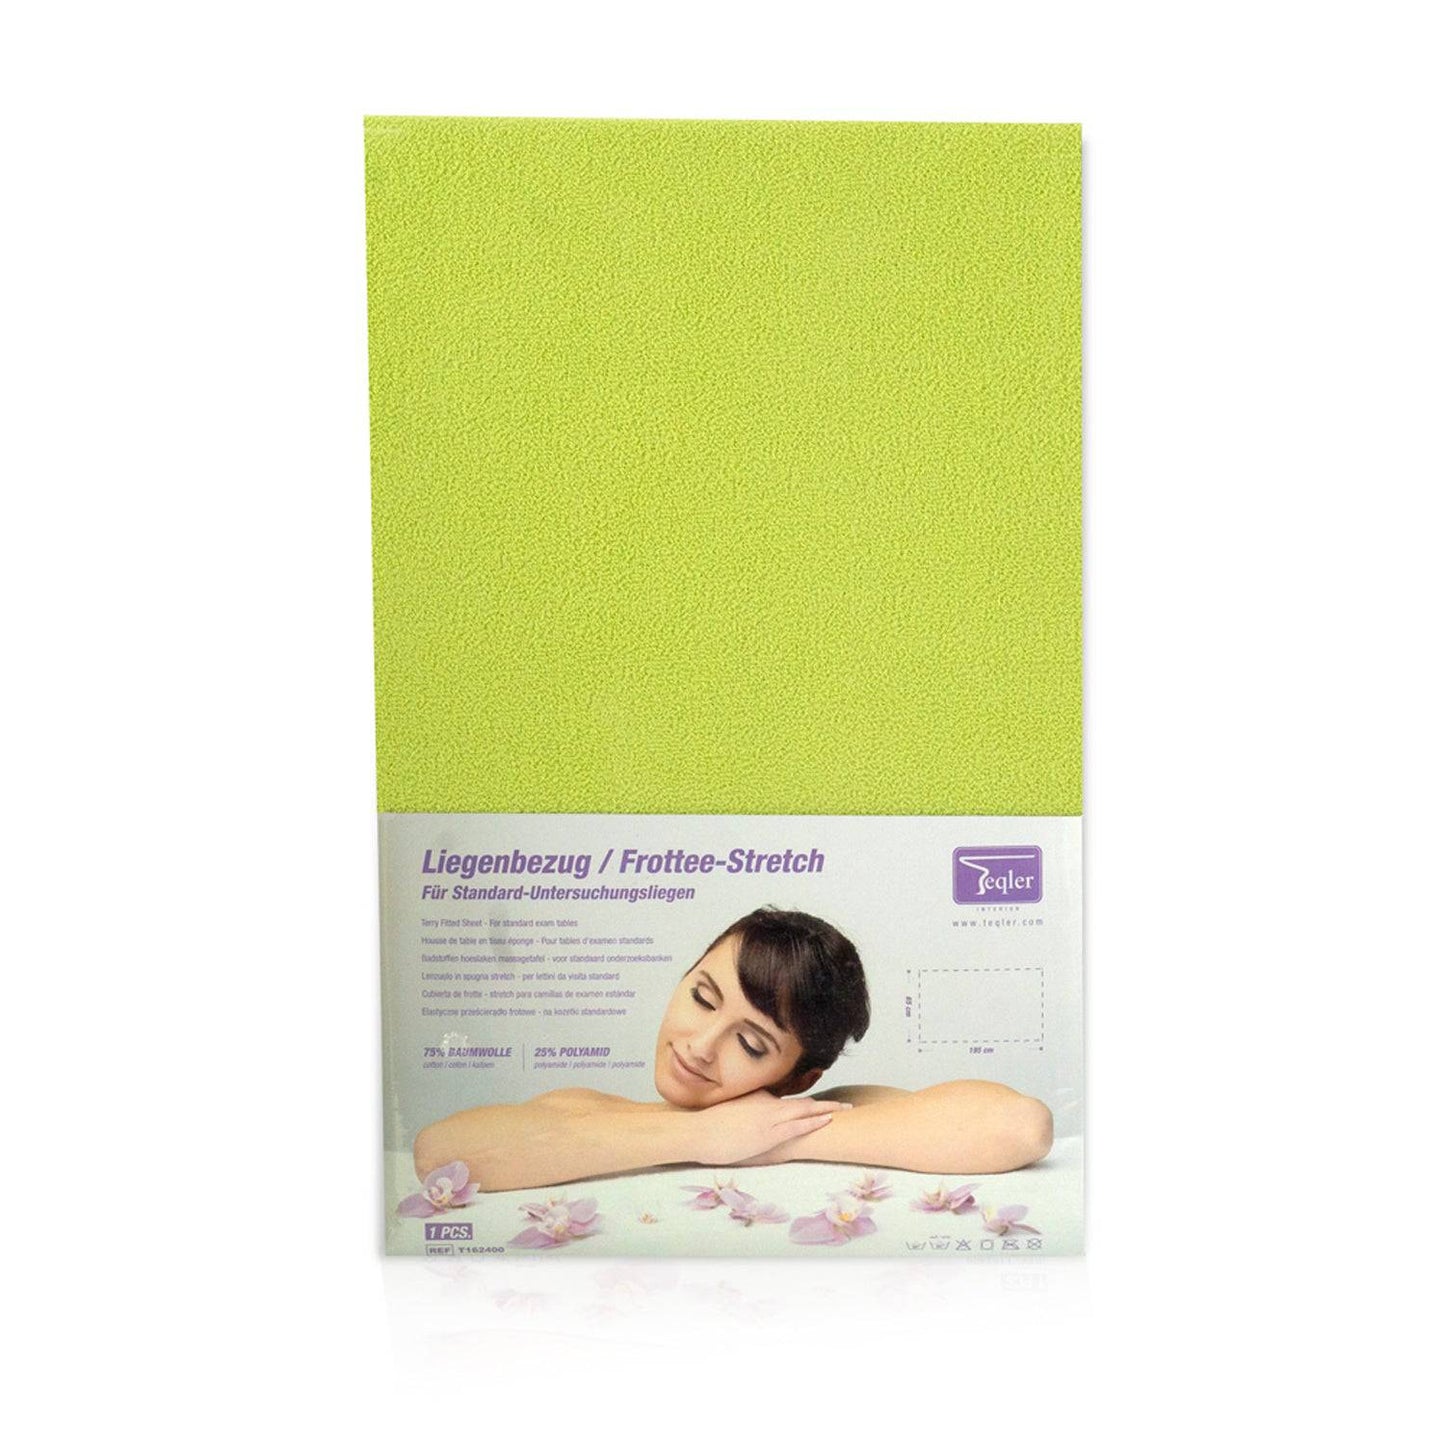 Fitted Sheet for Examination / Massage Couches - Lime Green